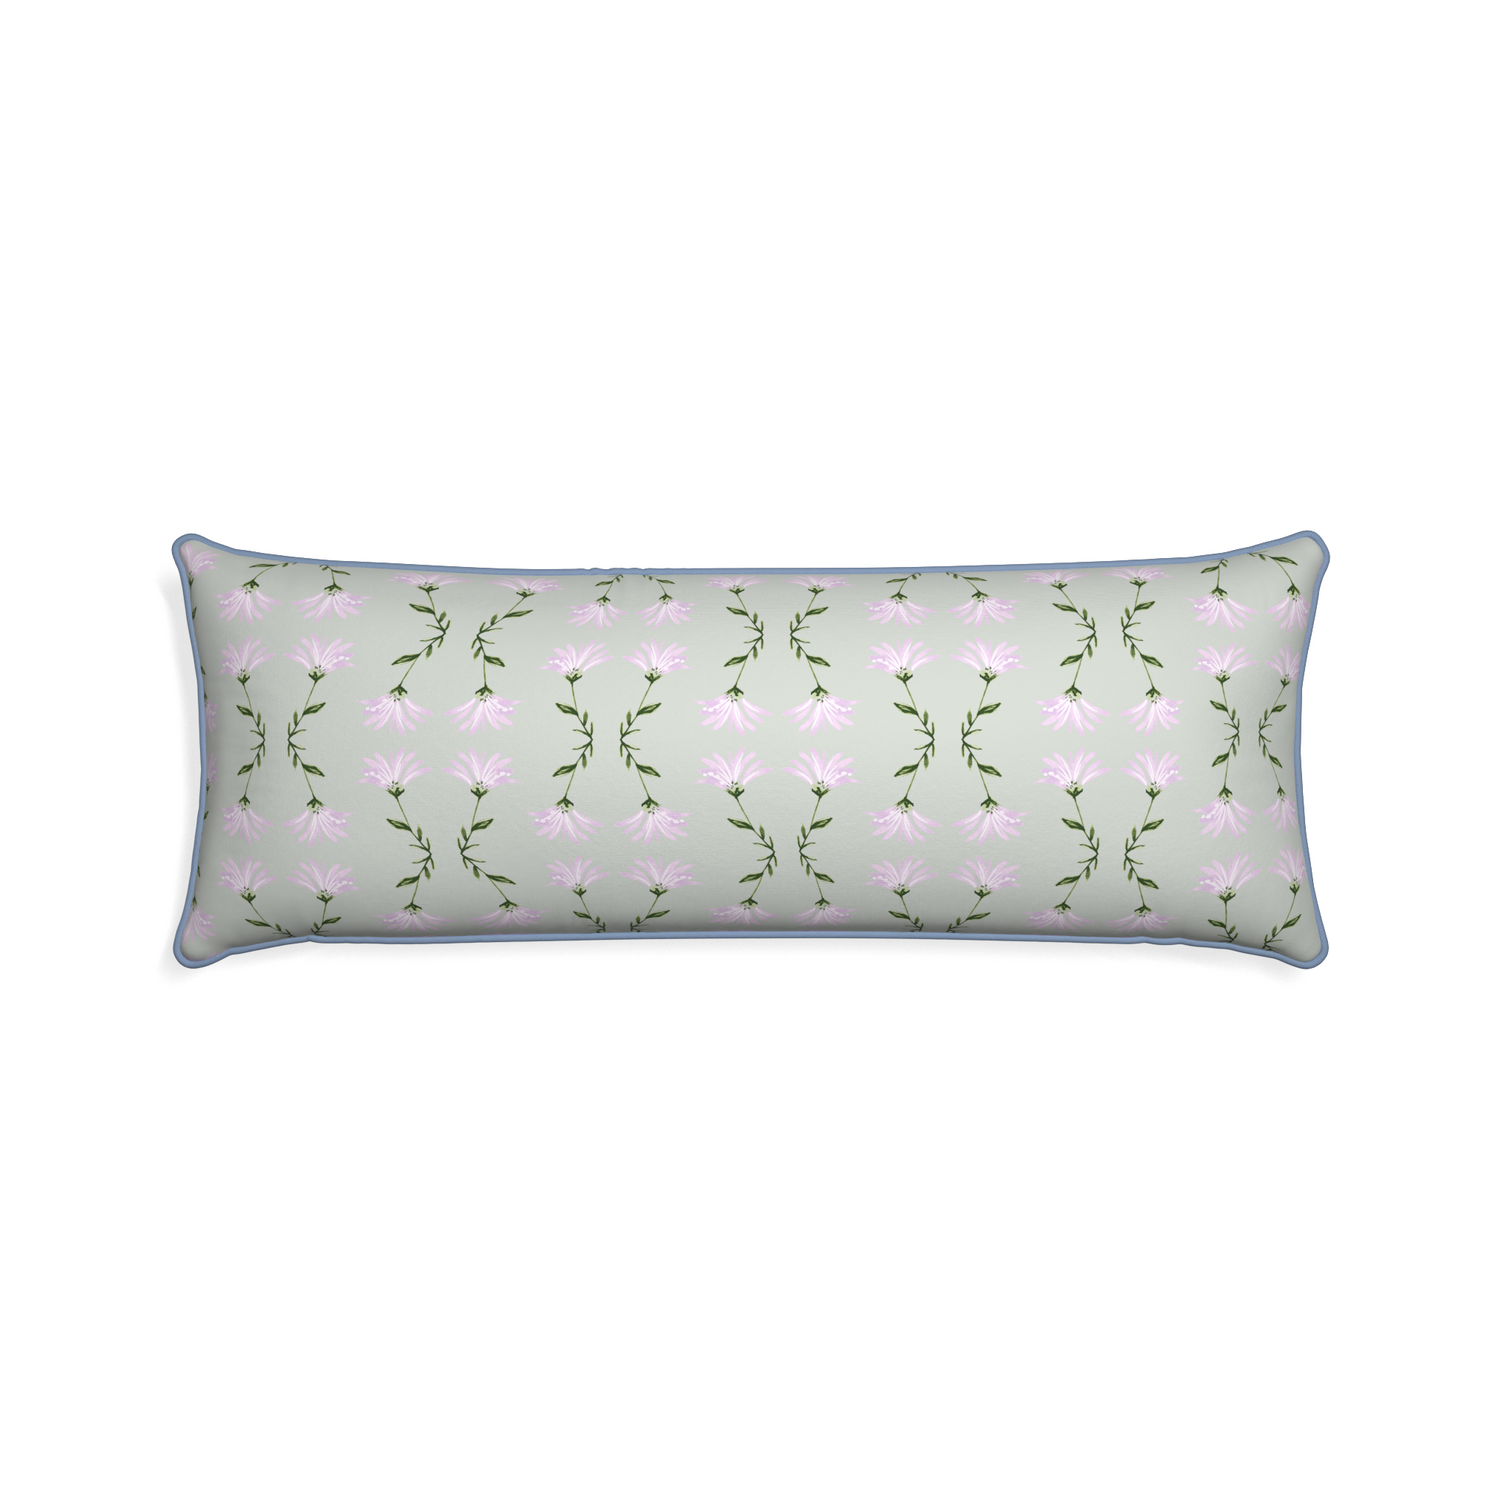 Xl-lumbar marina sage custom pillow with sky piping on white background